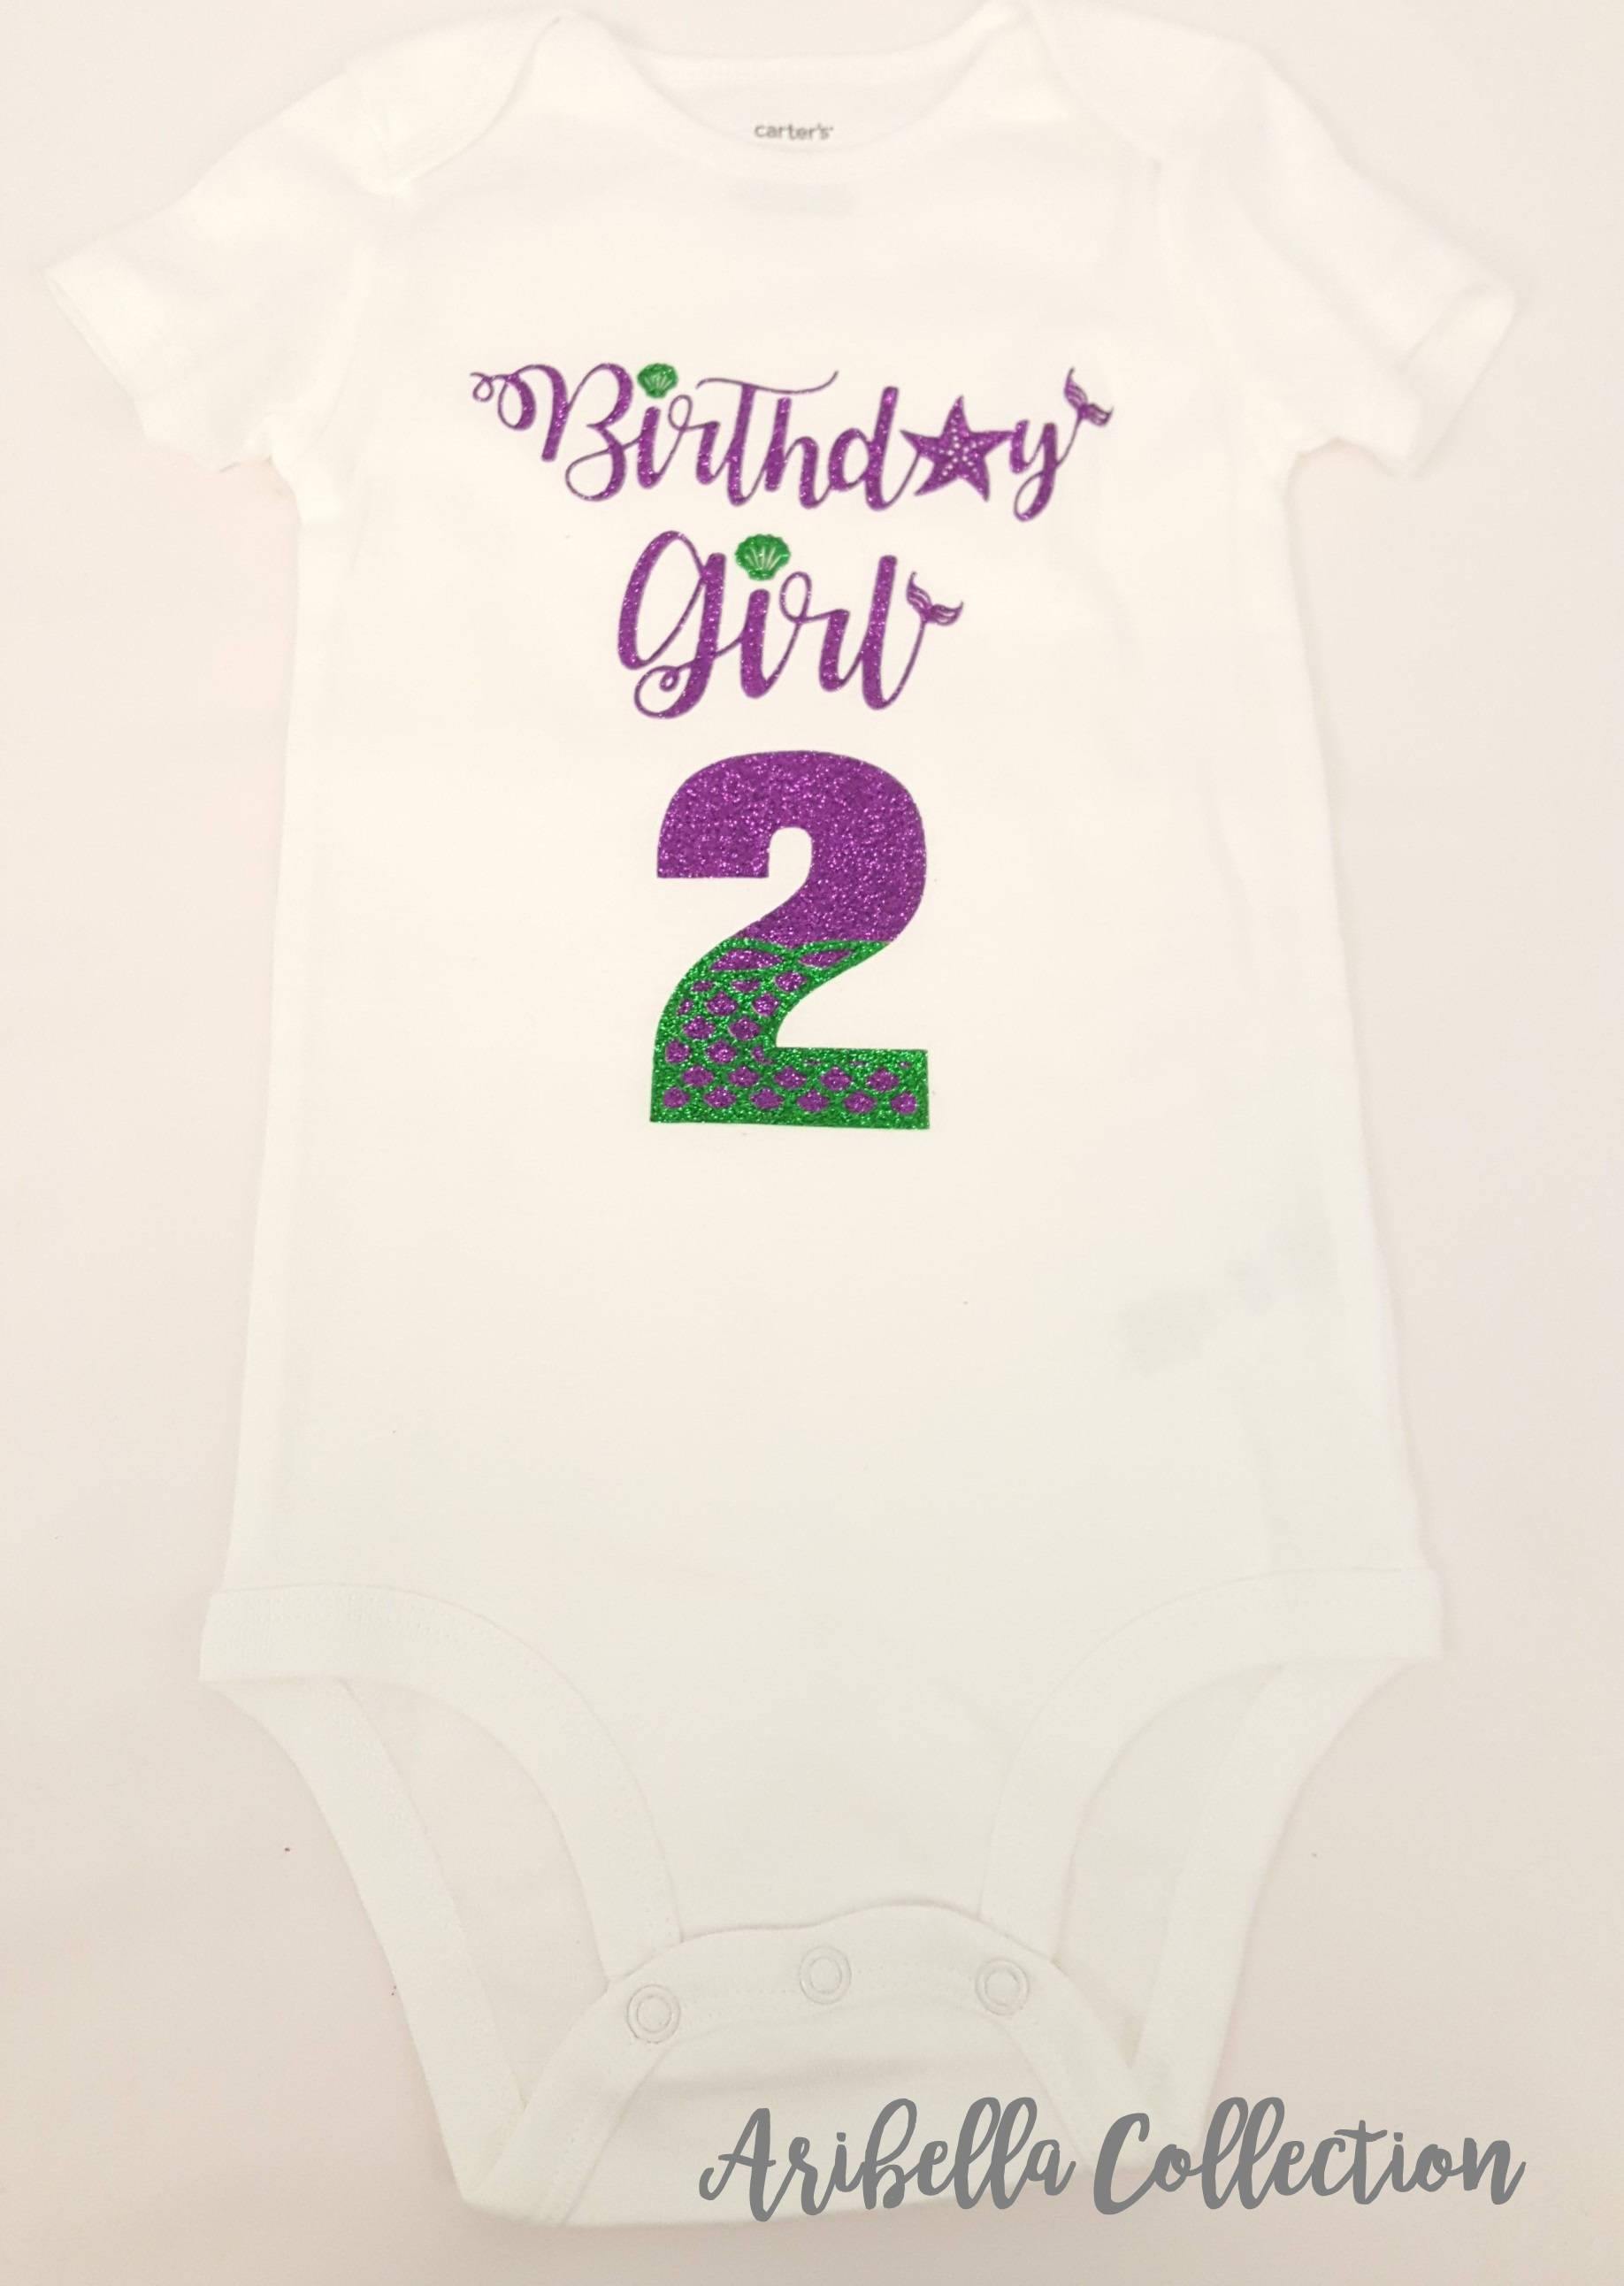 Birthday Girl Outfit - Bodysuit or T-shirt, Skirt, & Hair Clip Bow - Aribella Collection, Inc.